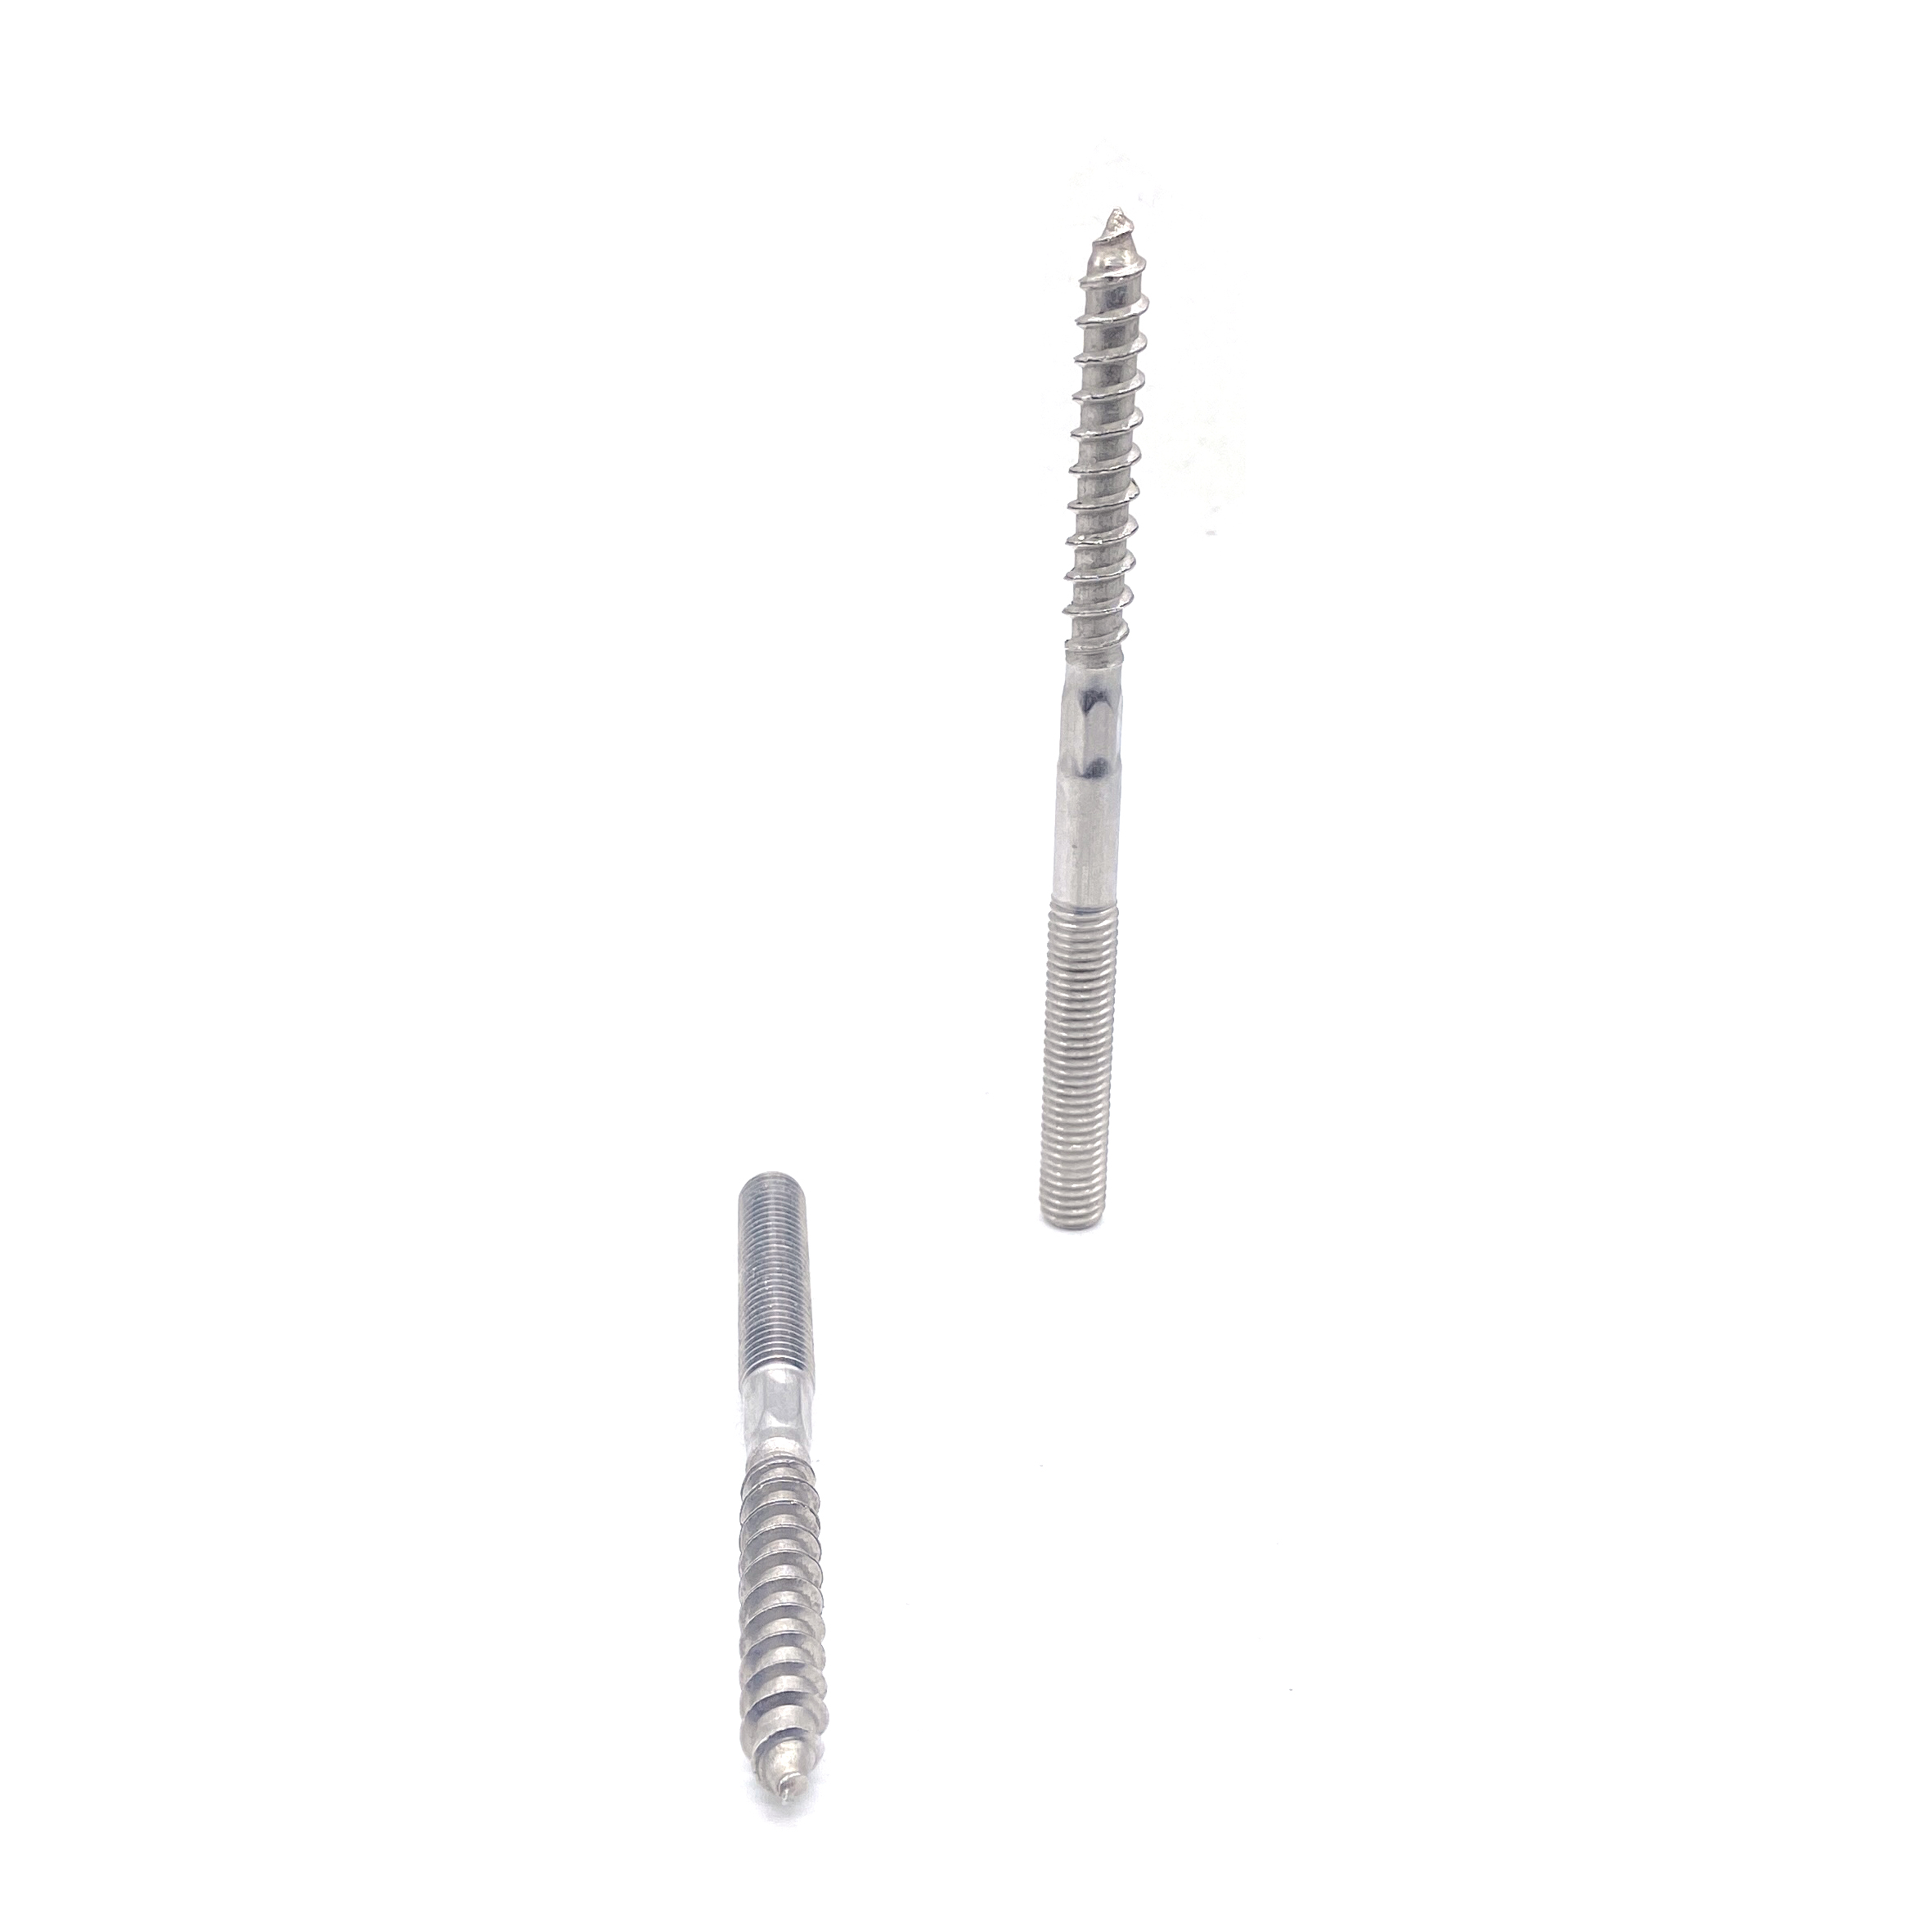 Stainless Steel Wooded Thread Double End Hanger Bolt